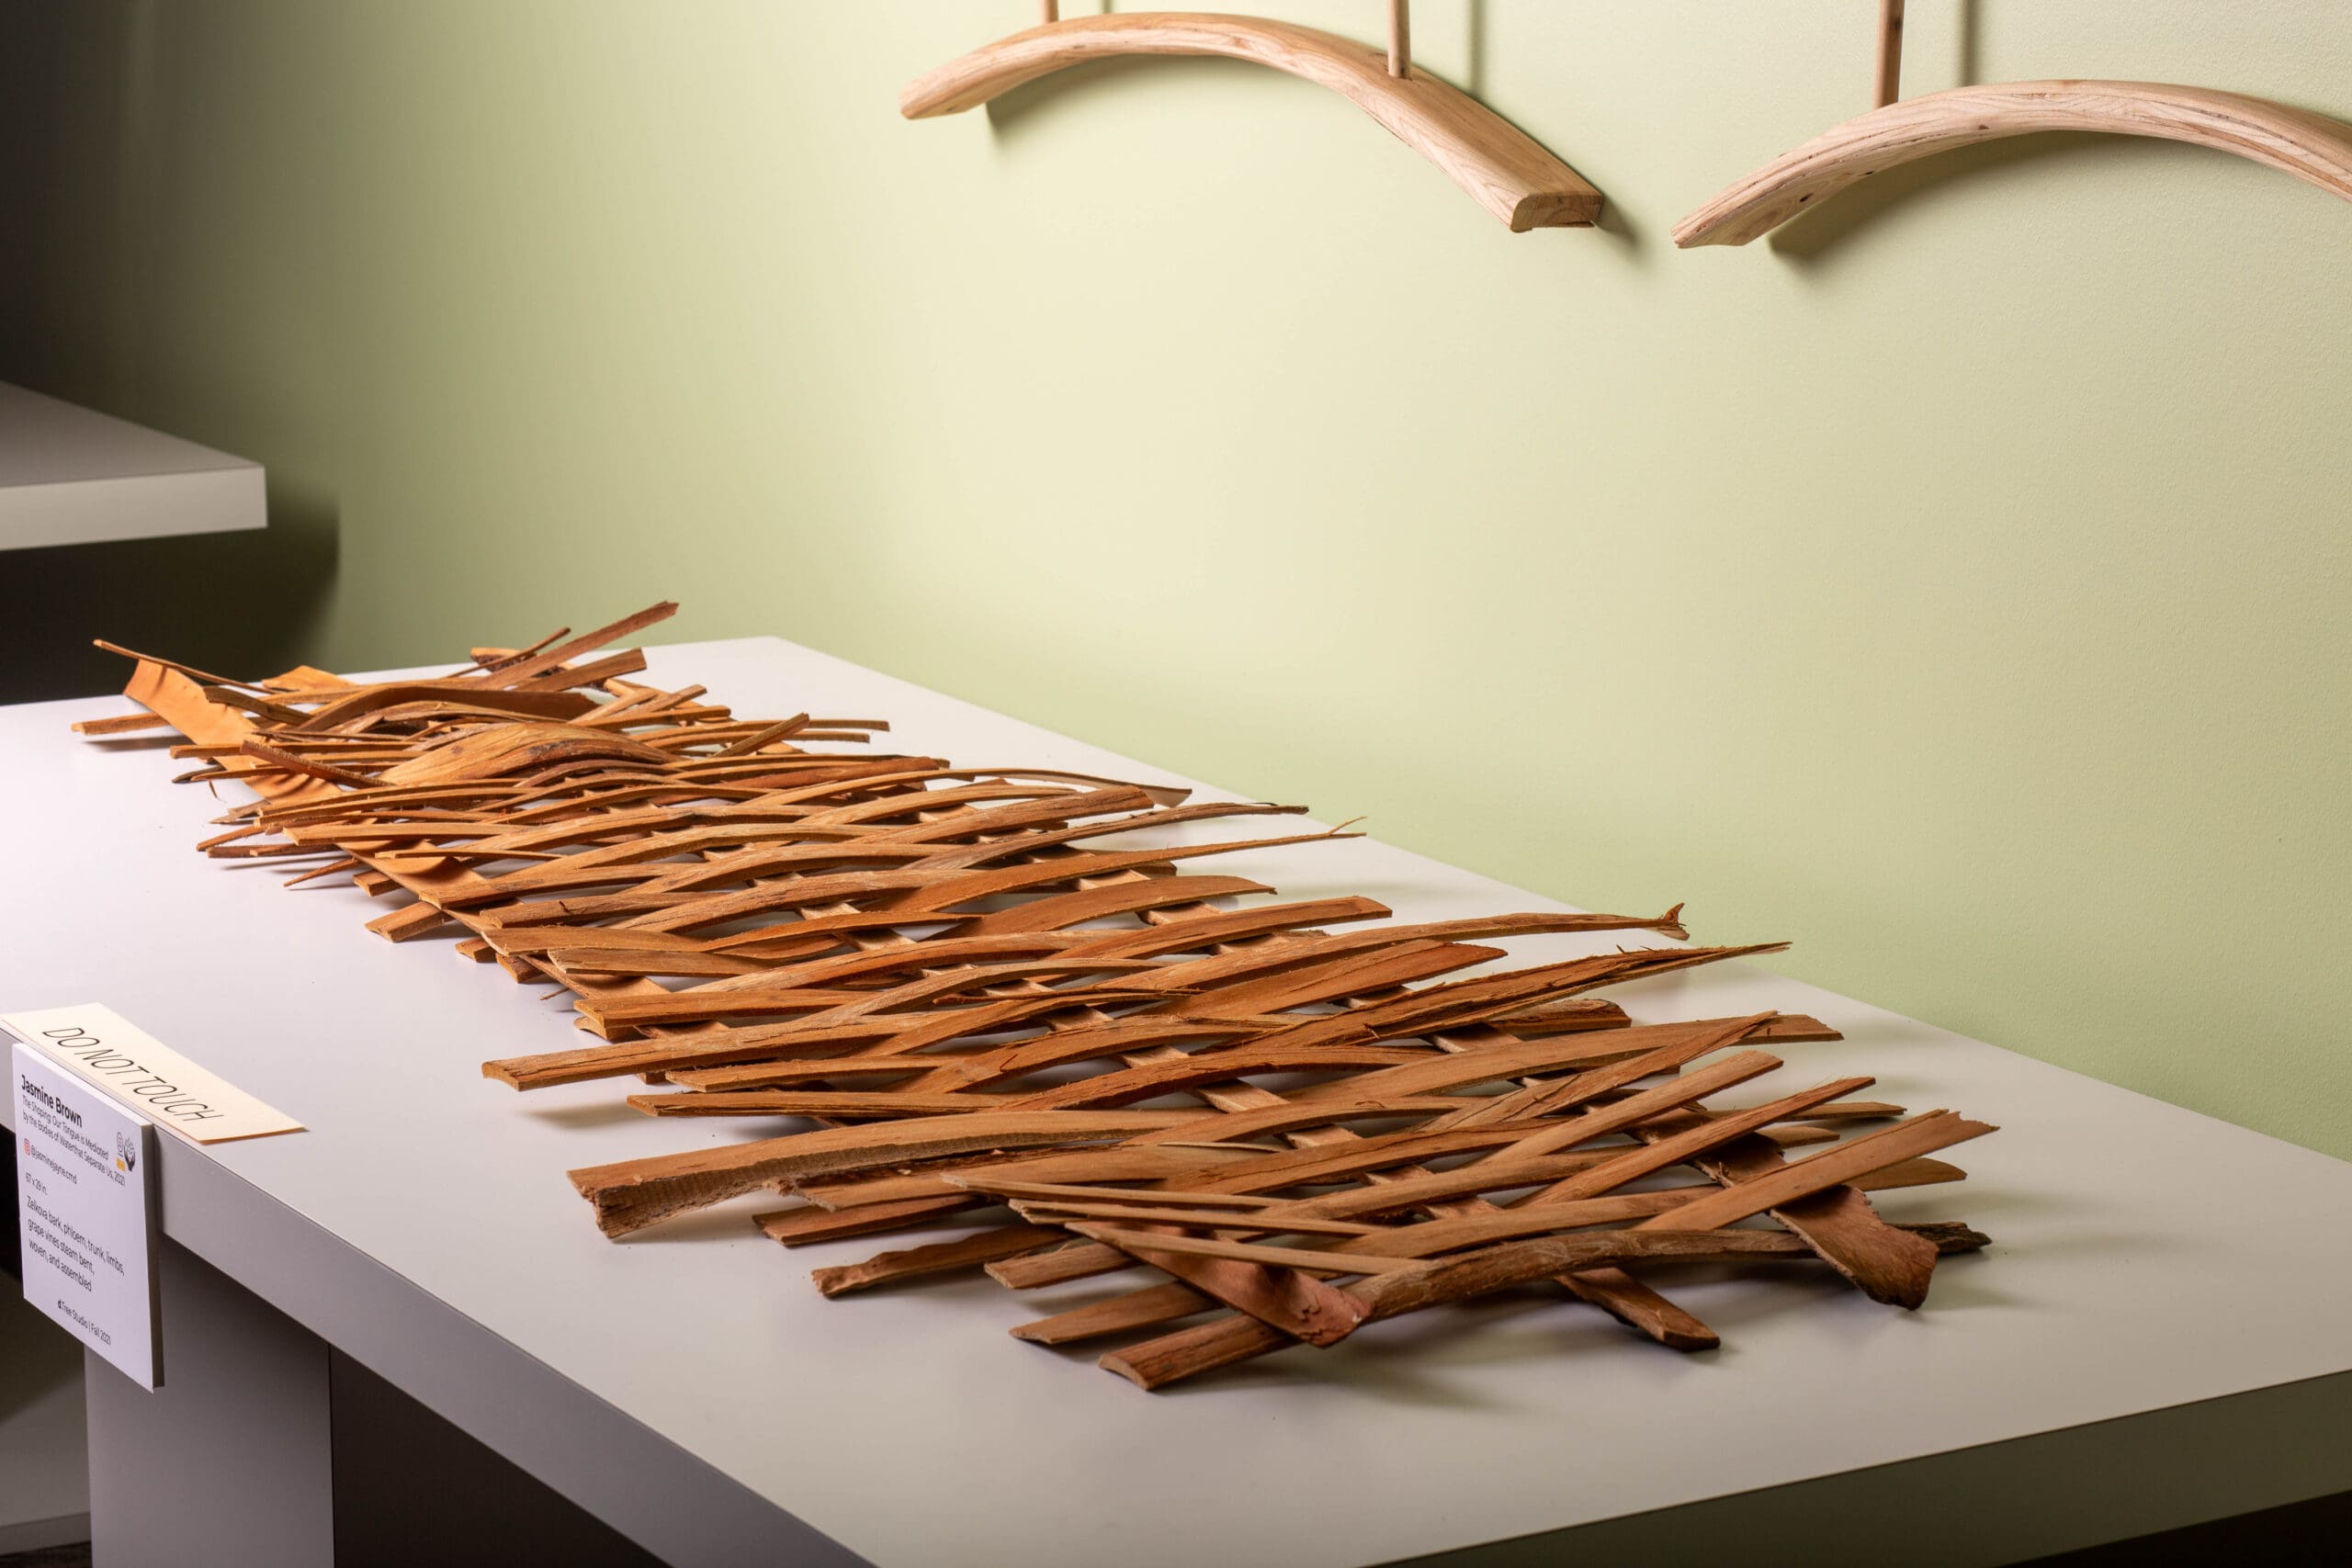 artwork that is pieces of zvelka wood woven together on display at the Wright Muesum